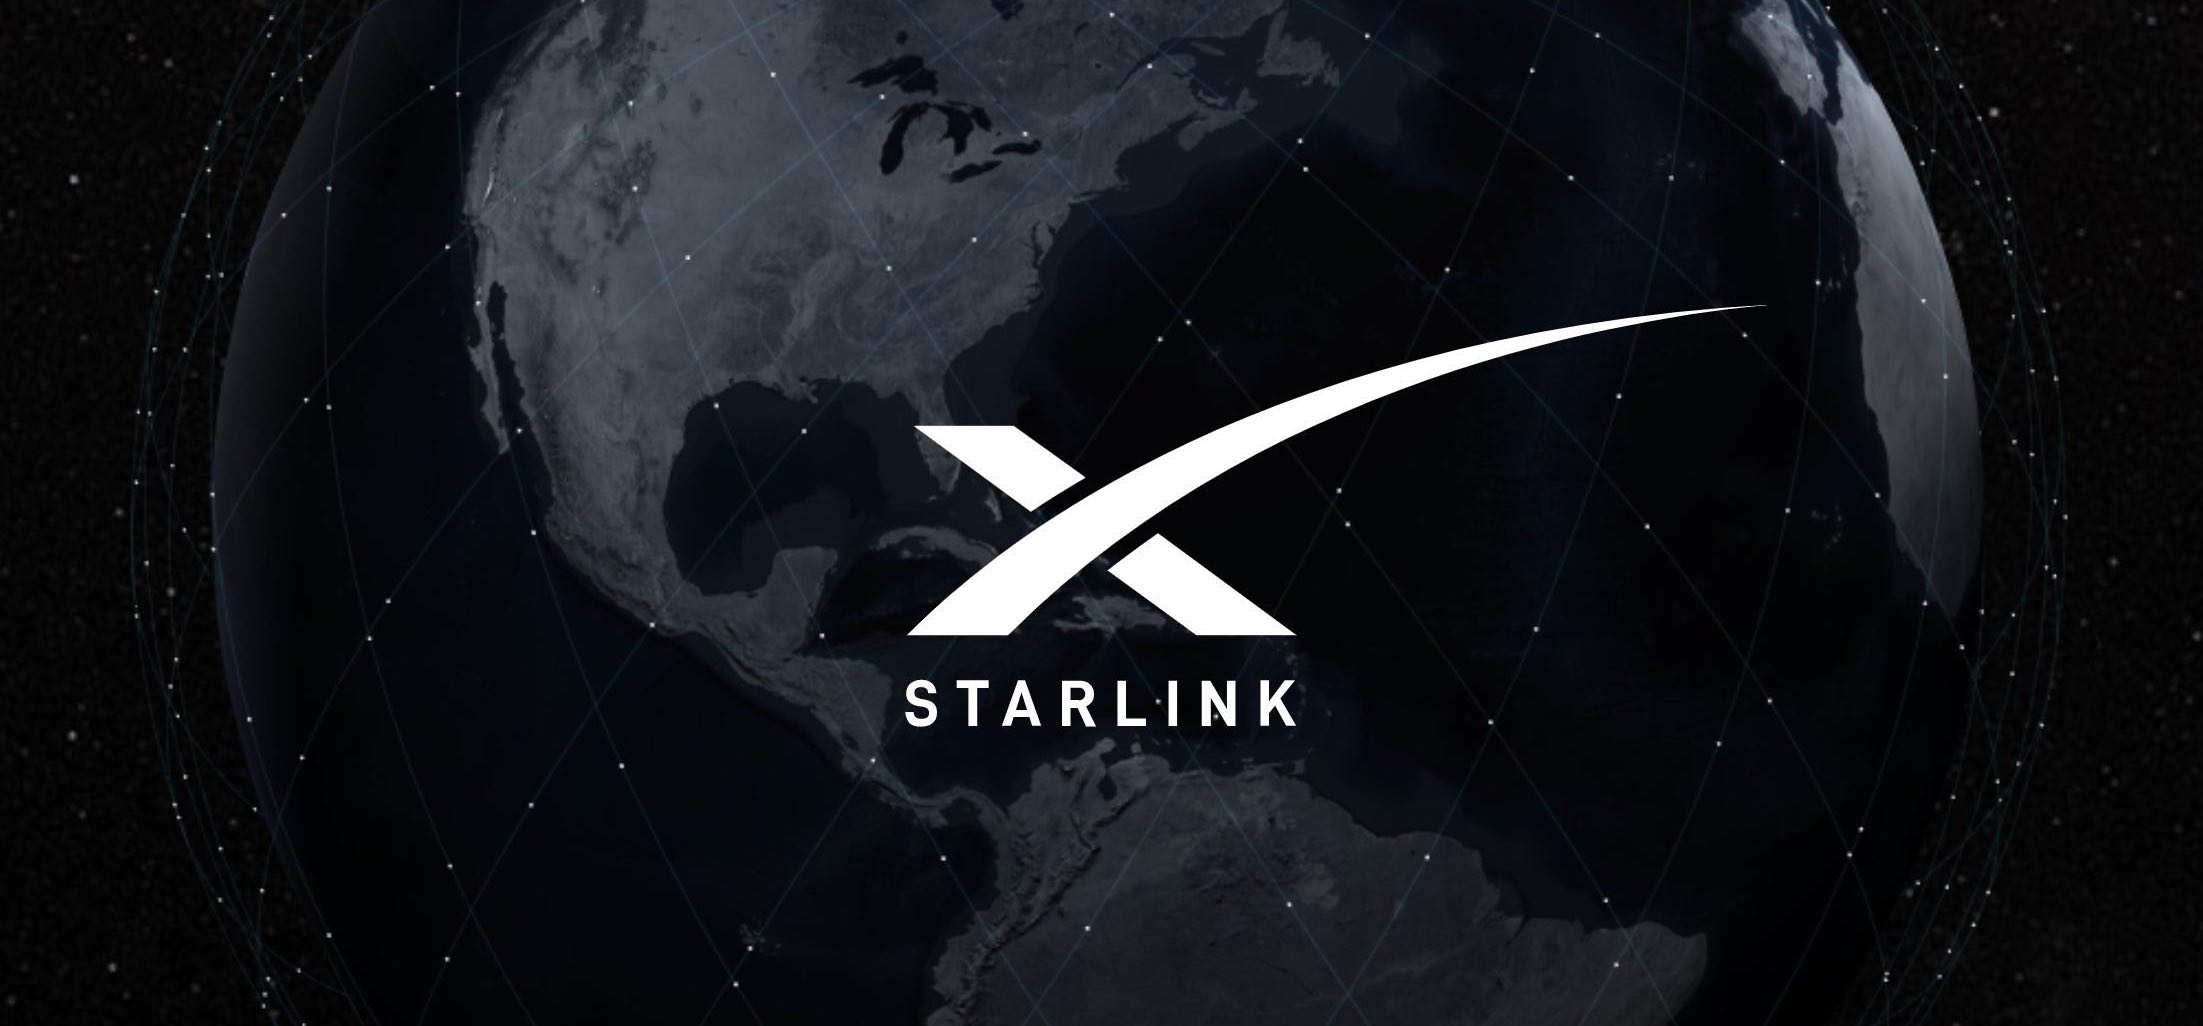 Spacex Starlink Engineers Take Questions In Reddit Ama Here Are Highlights Ars Technica